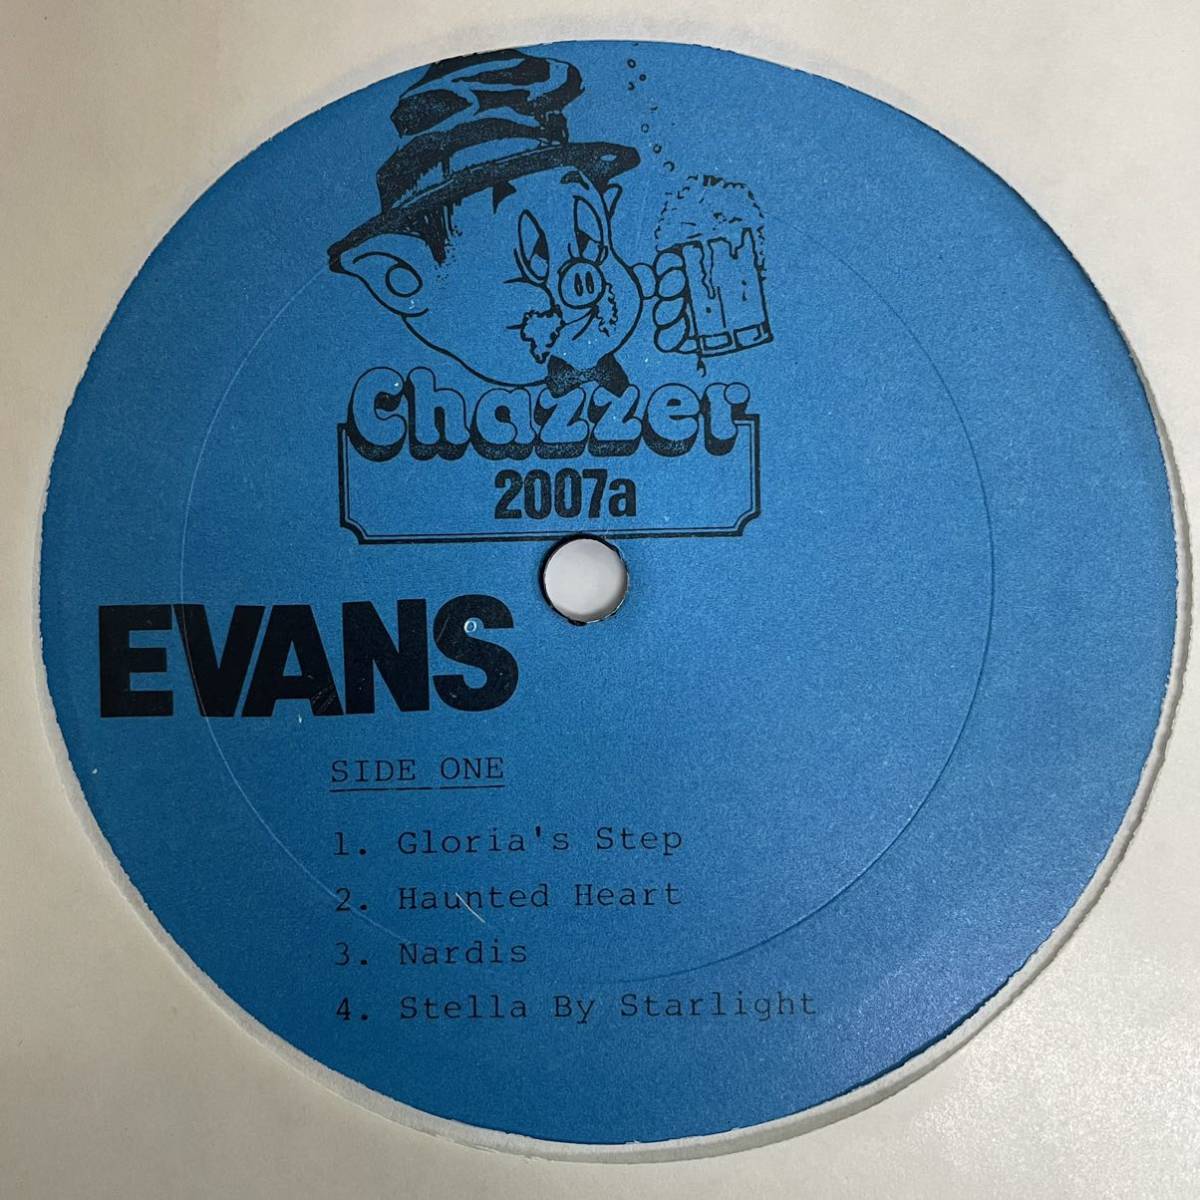 COLLECTORS / LP / BILL EVANS TRIO THE VIBES ARE ON / Chazzer 2007 / ビル・エヴァンス / コレクターズ盤_画像3